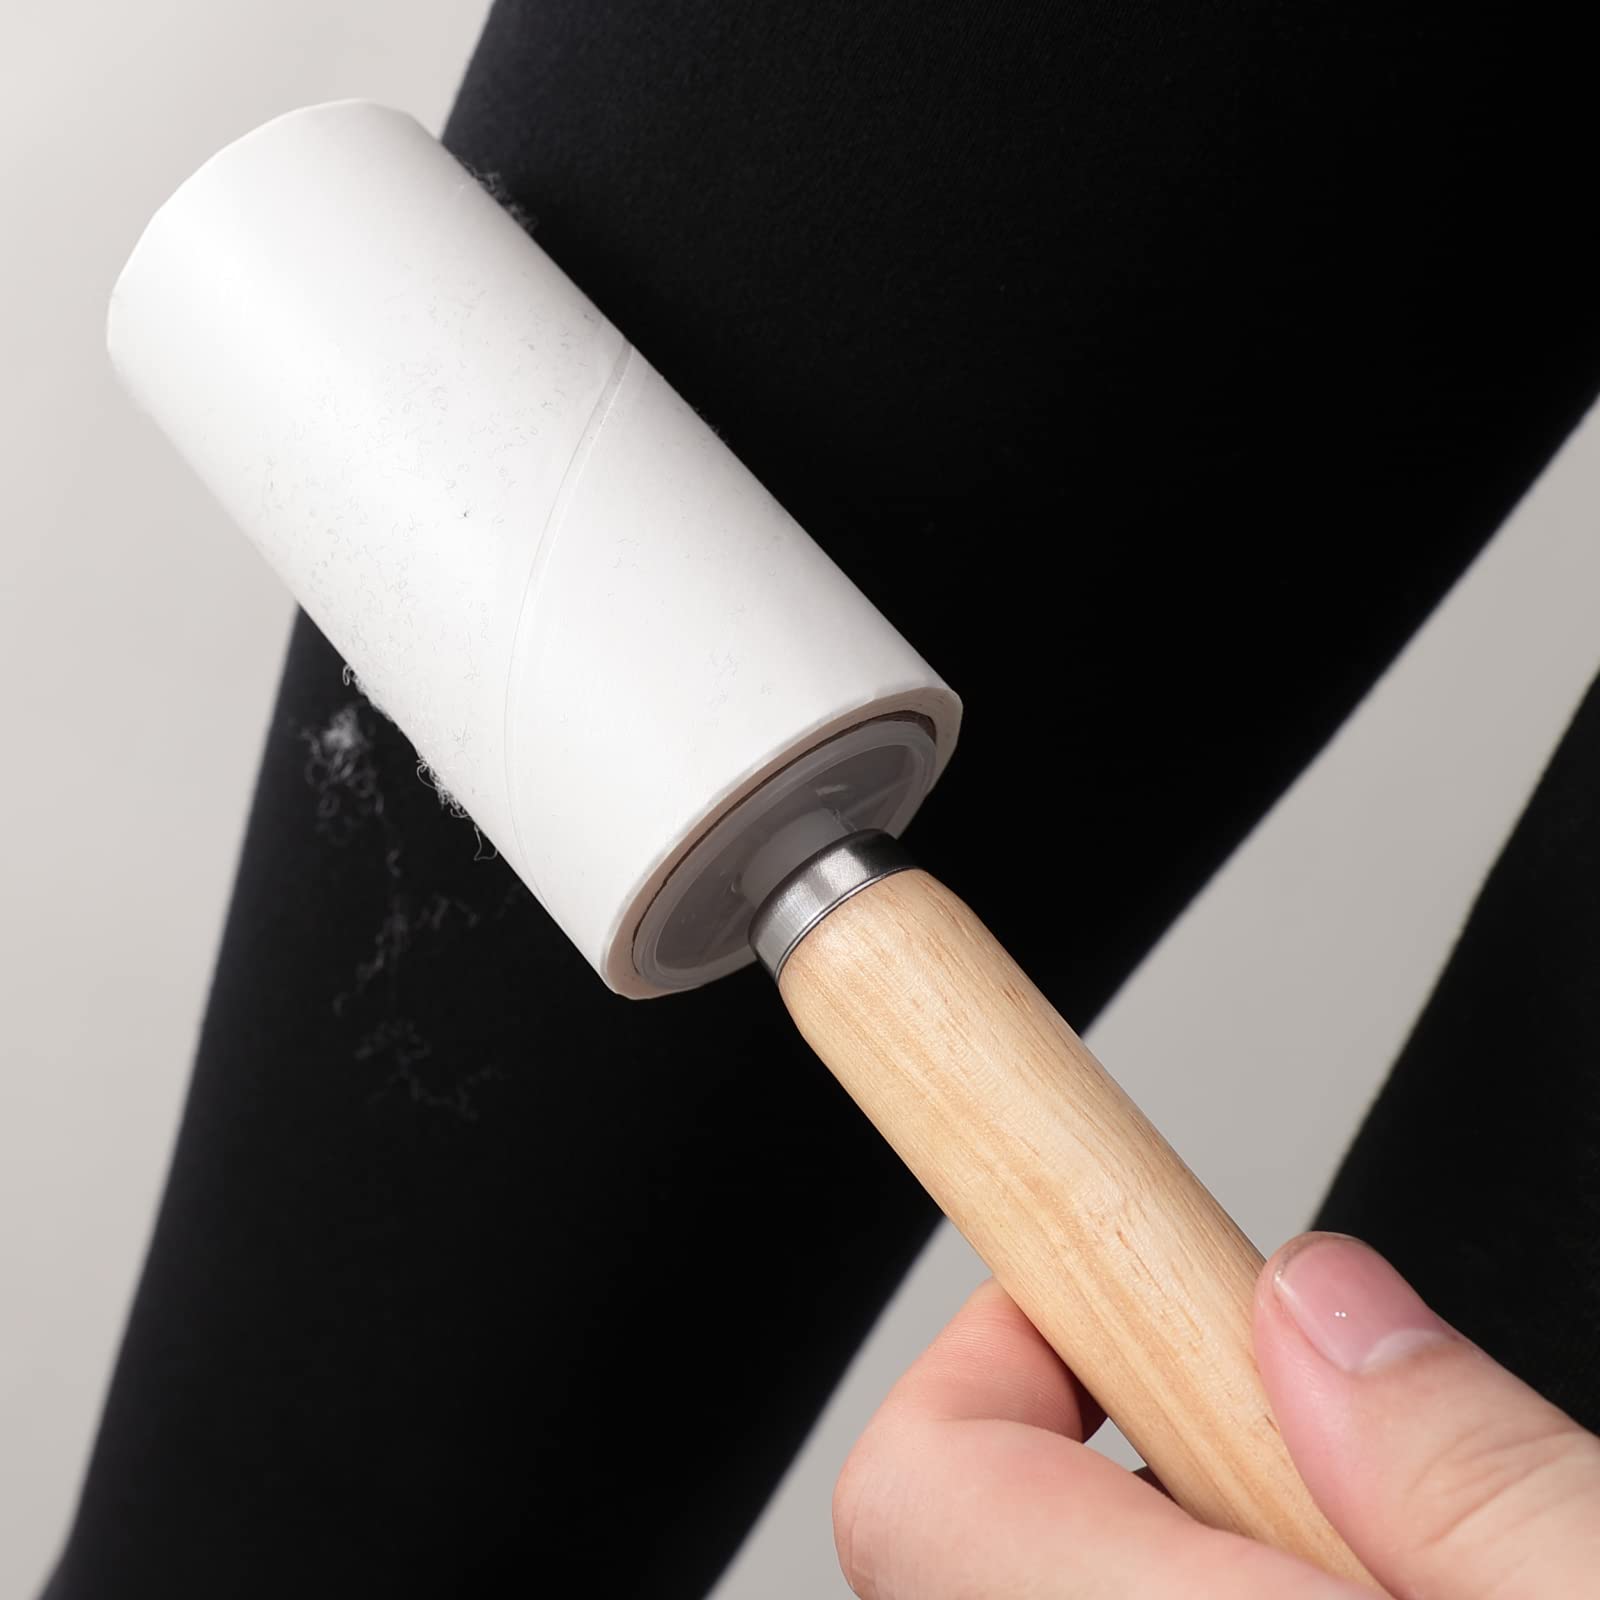 Lint Roller for Clothes | Wooden Lint Remover for Clothes | Reusable Easy Tear Sheets | 60 Sheets Per Roll (Pack of 2 + 3 Rolls)